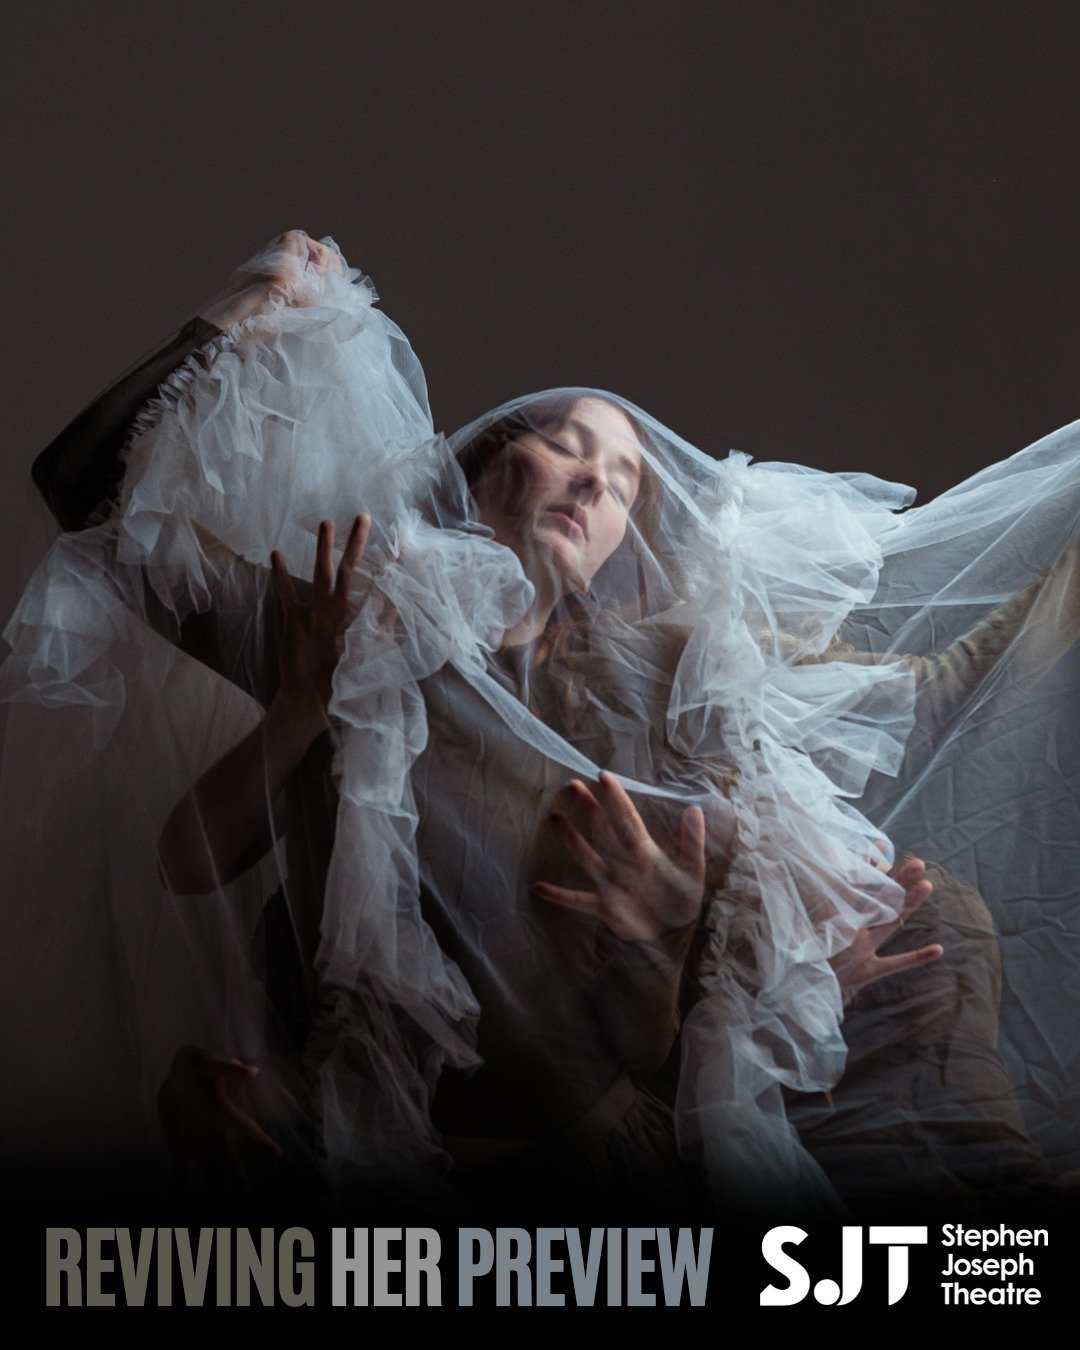 We're performing a short preview of REVIVING HER at @thesjt tonight, commissioned by @yorkdancespace! 🥳⁠
⁠
The show, Making Waves, is an evening celebrating the breadth of dance across Yorkshire. ⁠
⁠
⏰ 7pm ⁠
📍 @thesjt Scarborough⁠
⁠
We can't wait t